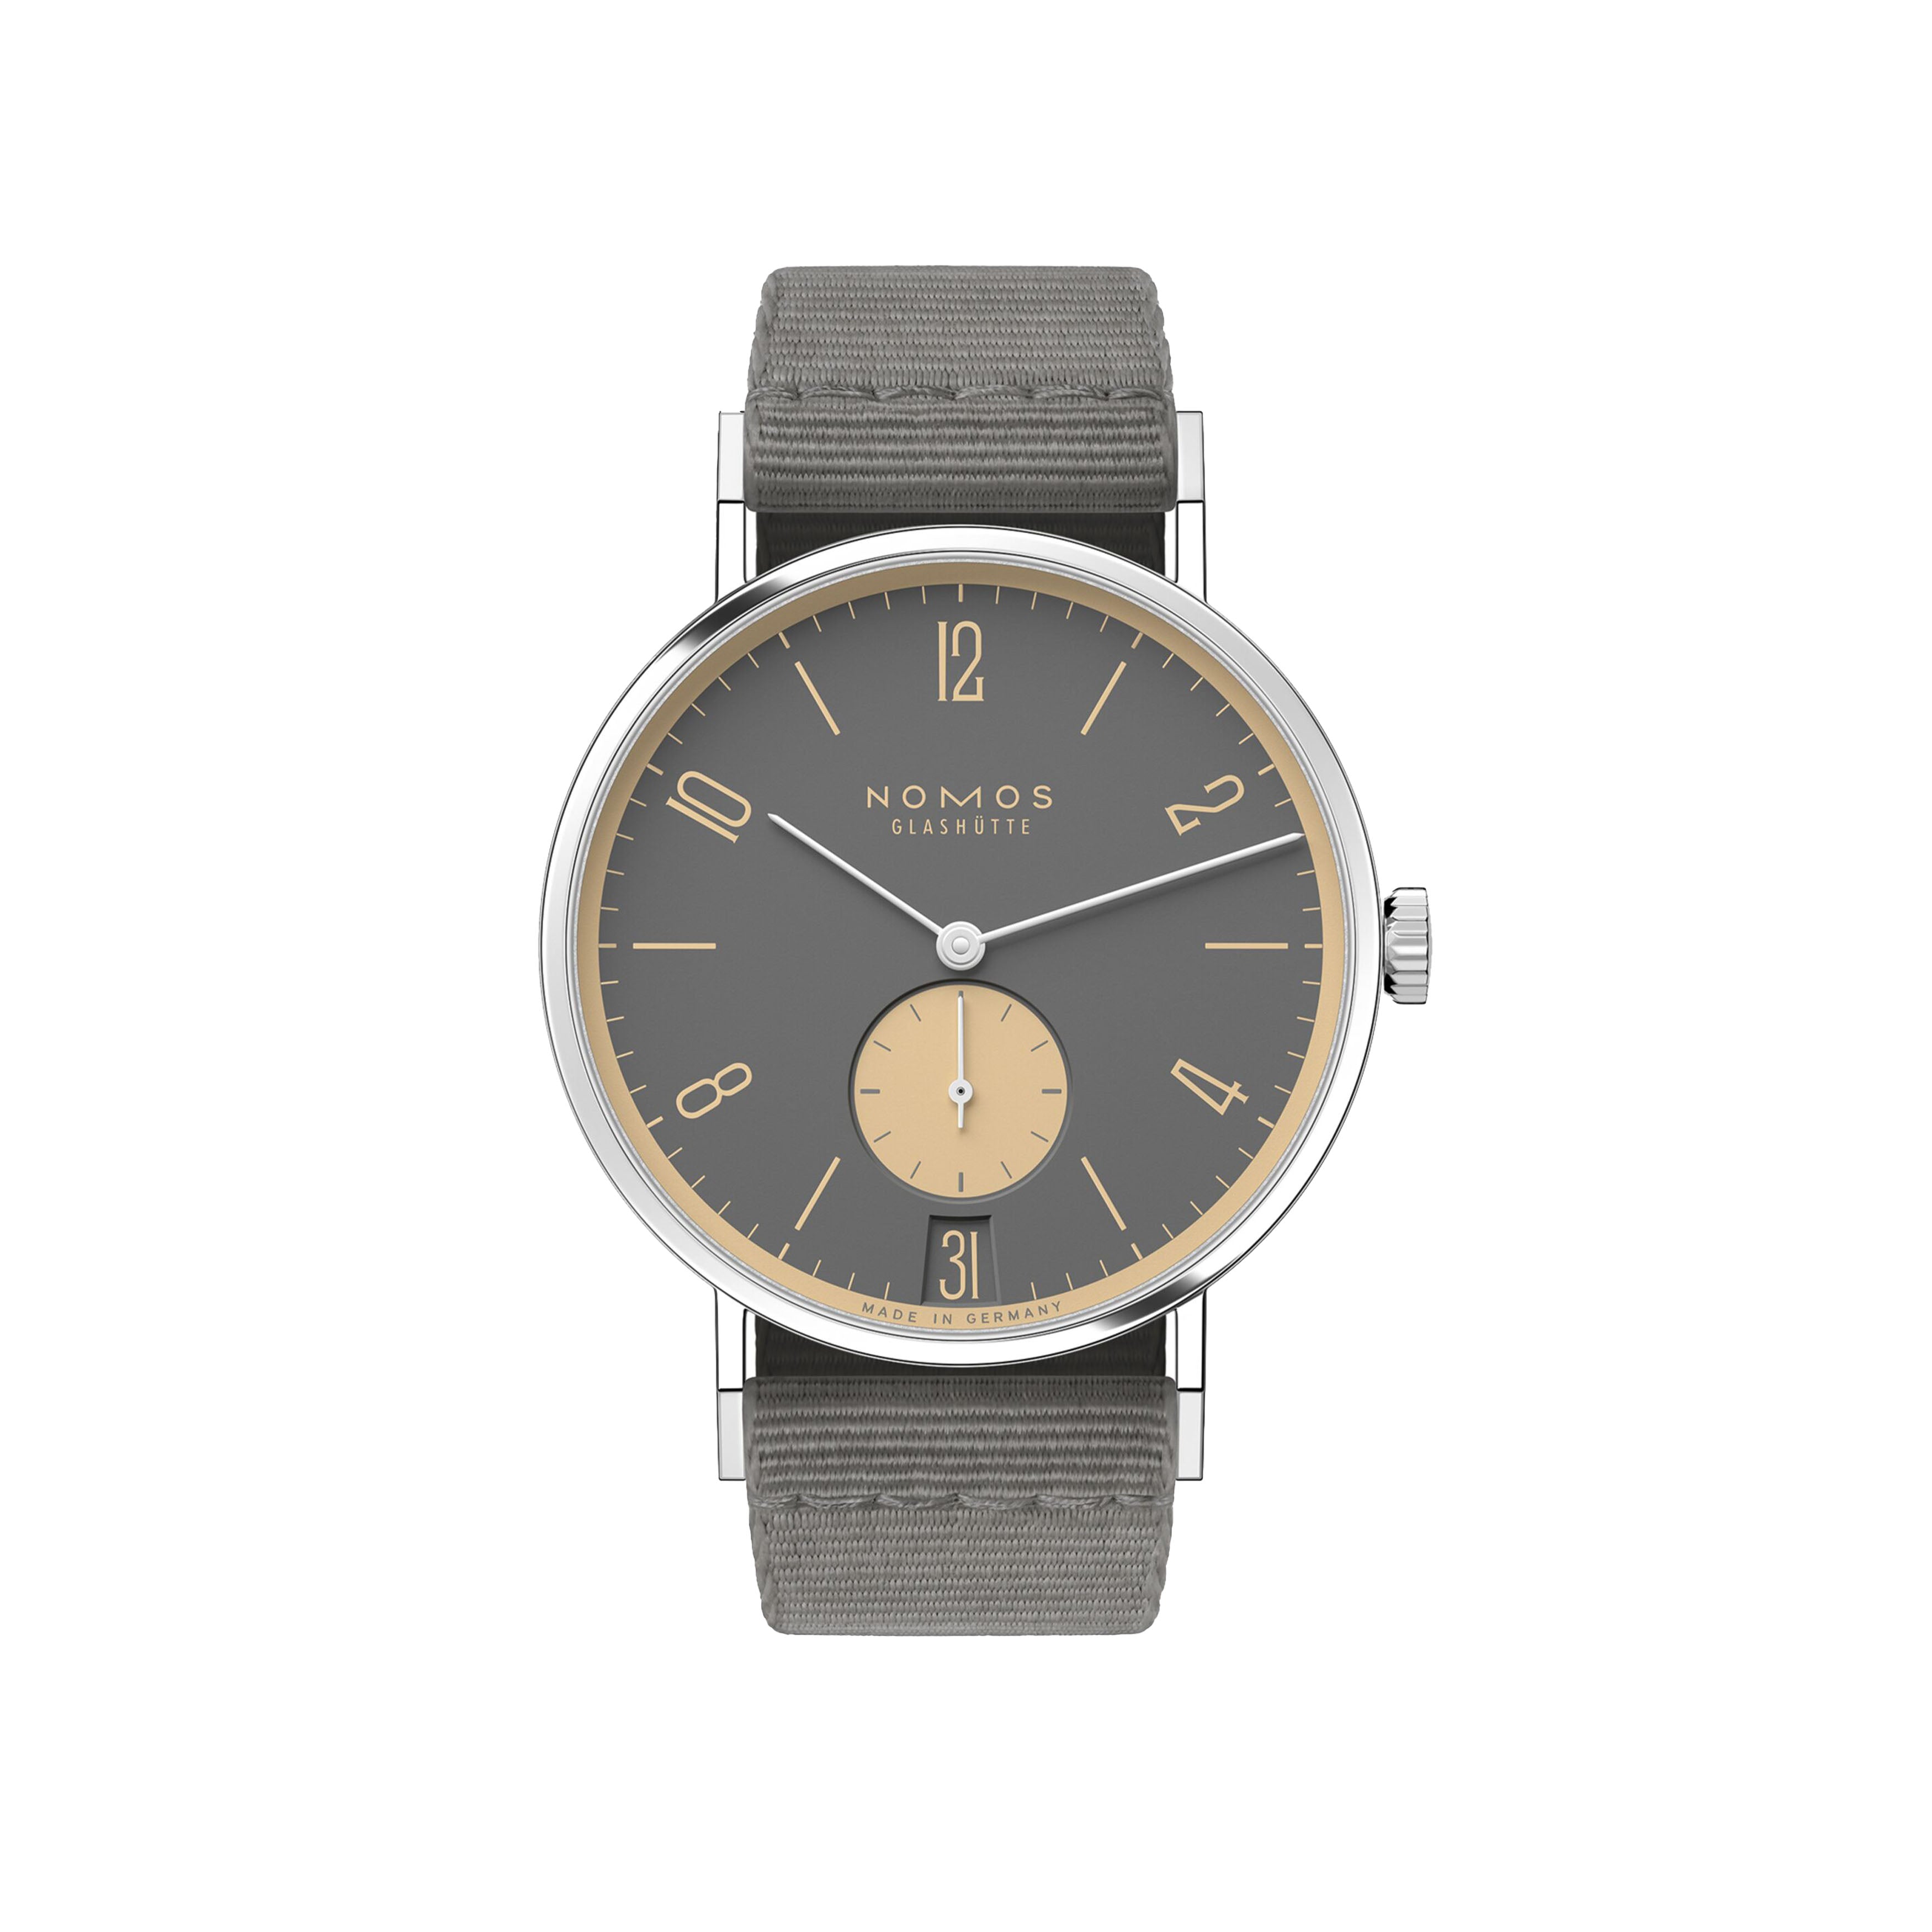 NOMOS TANGENTE 38 DATE HAIFISCHGRAU WATCH, 37.5MM GRAY DIAL, 179.S20